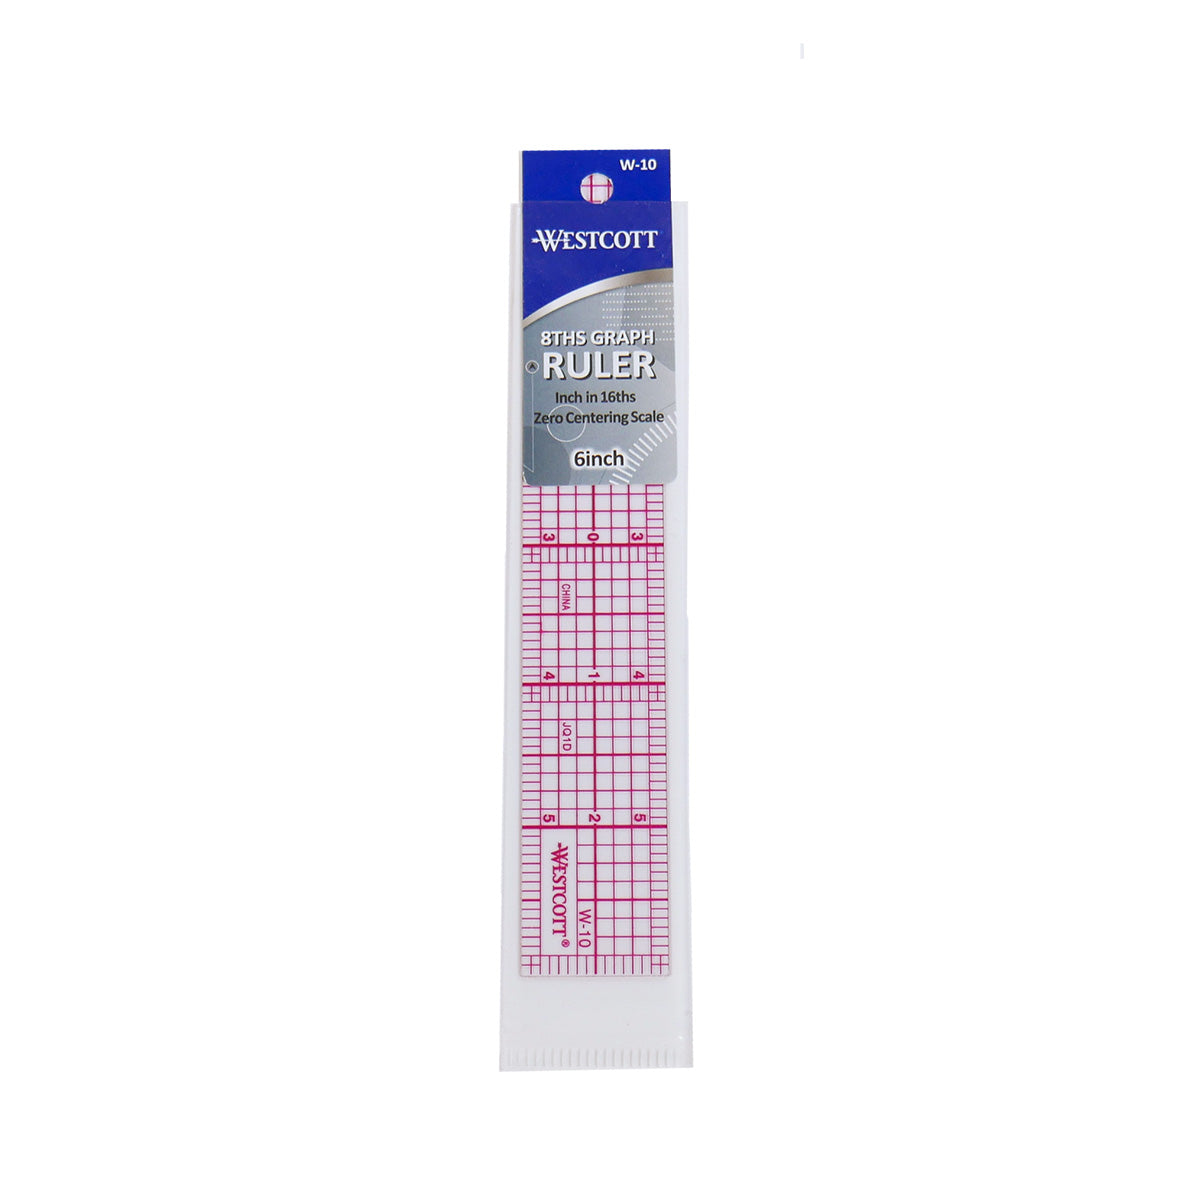 A beveled 8ths graph 6" ruler by Westcott still in packaging.